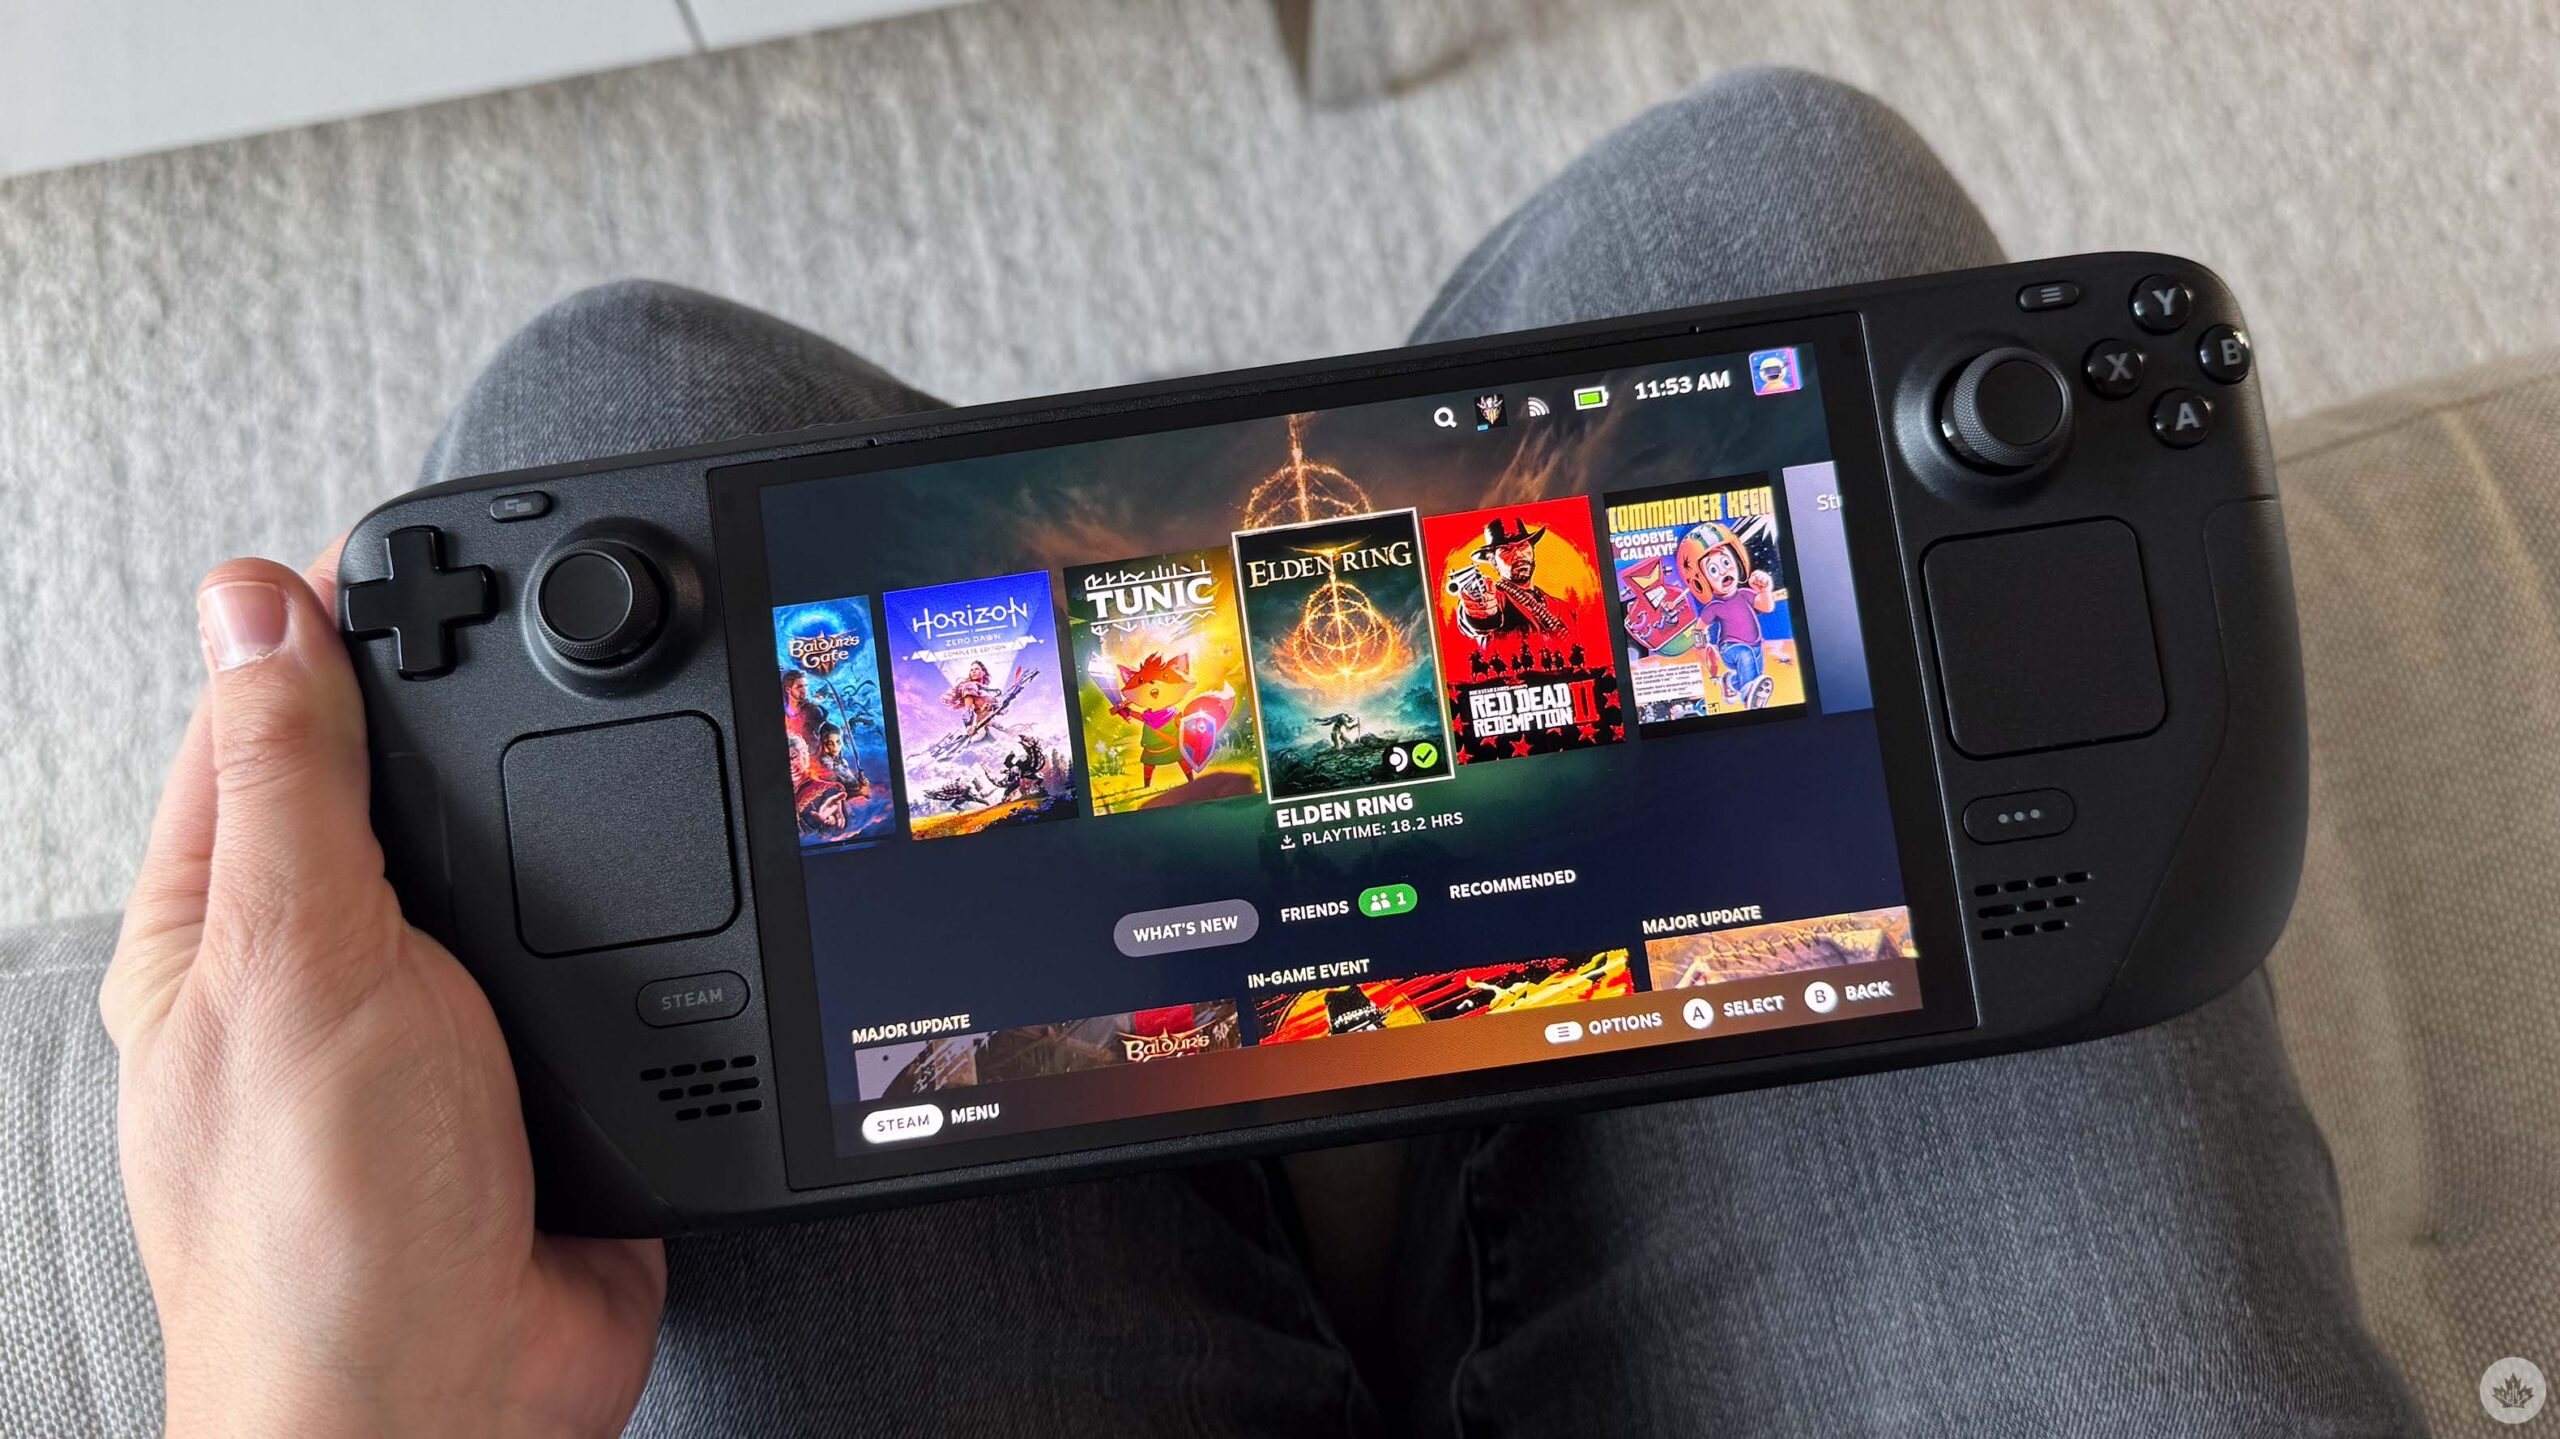 Surprise: Steam Deck OLED Launches Nov. 16 With Better Chip, Battery Life,  More